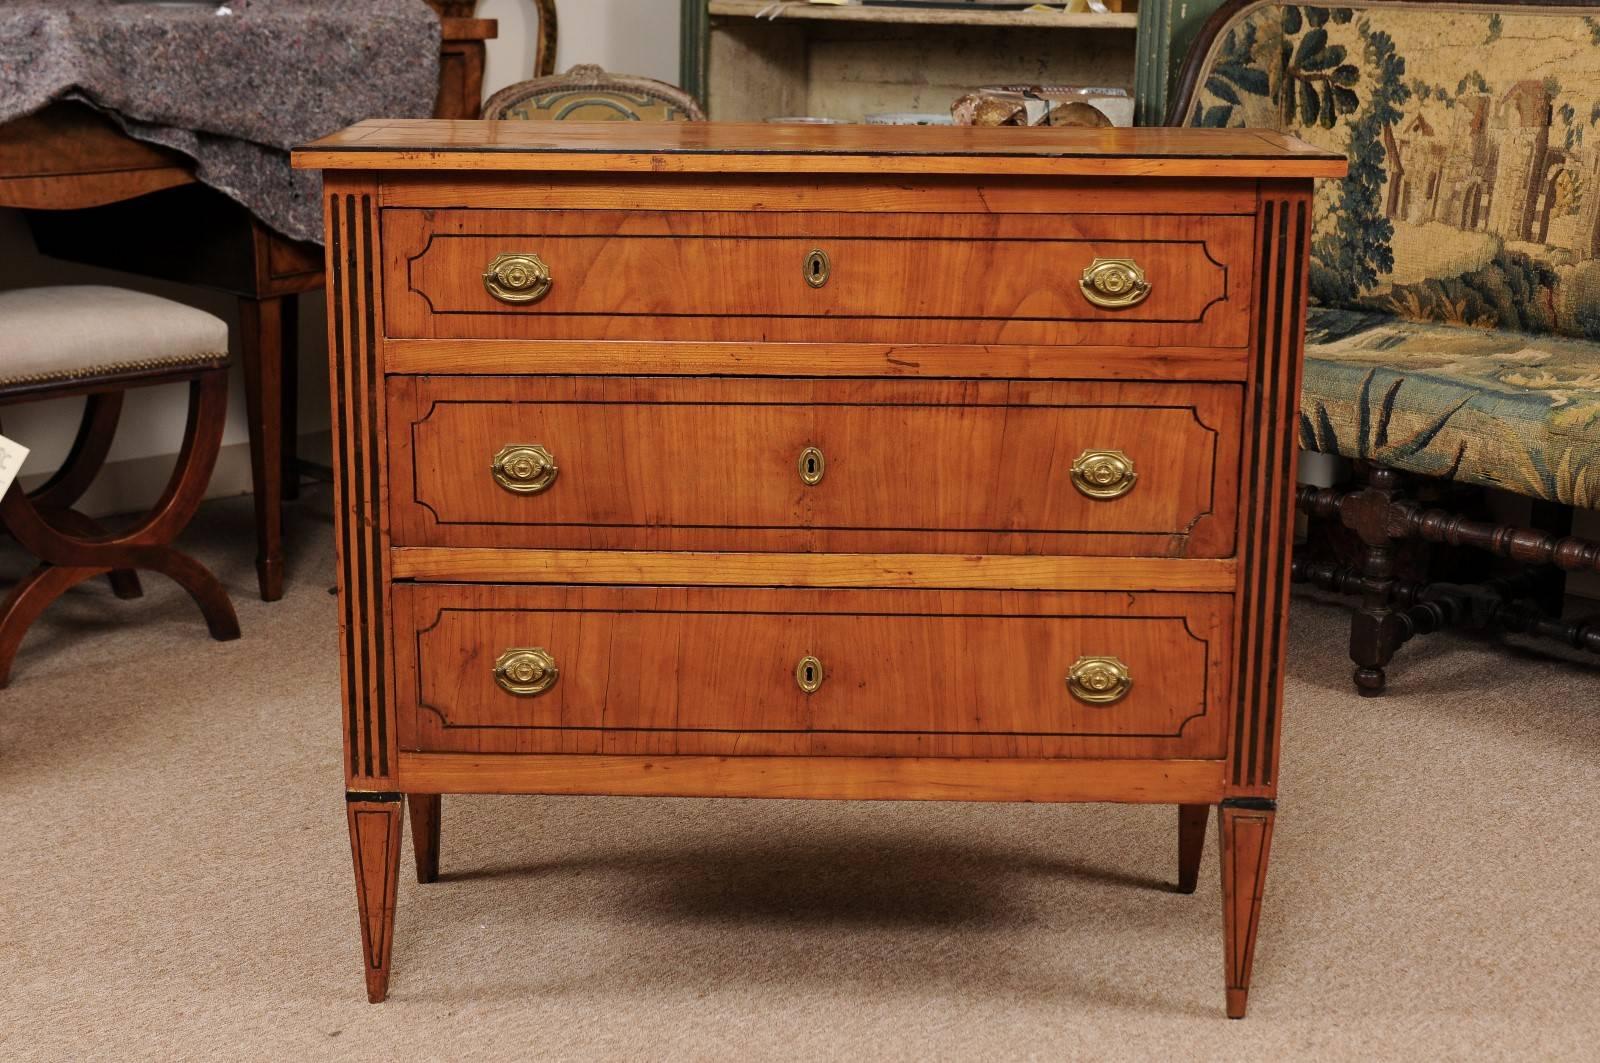 The neoclassical Italian fruitwood commode of shallow size with ebonized inlay, three drawers with brass pulls and tapered legs.